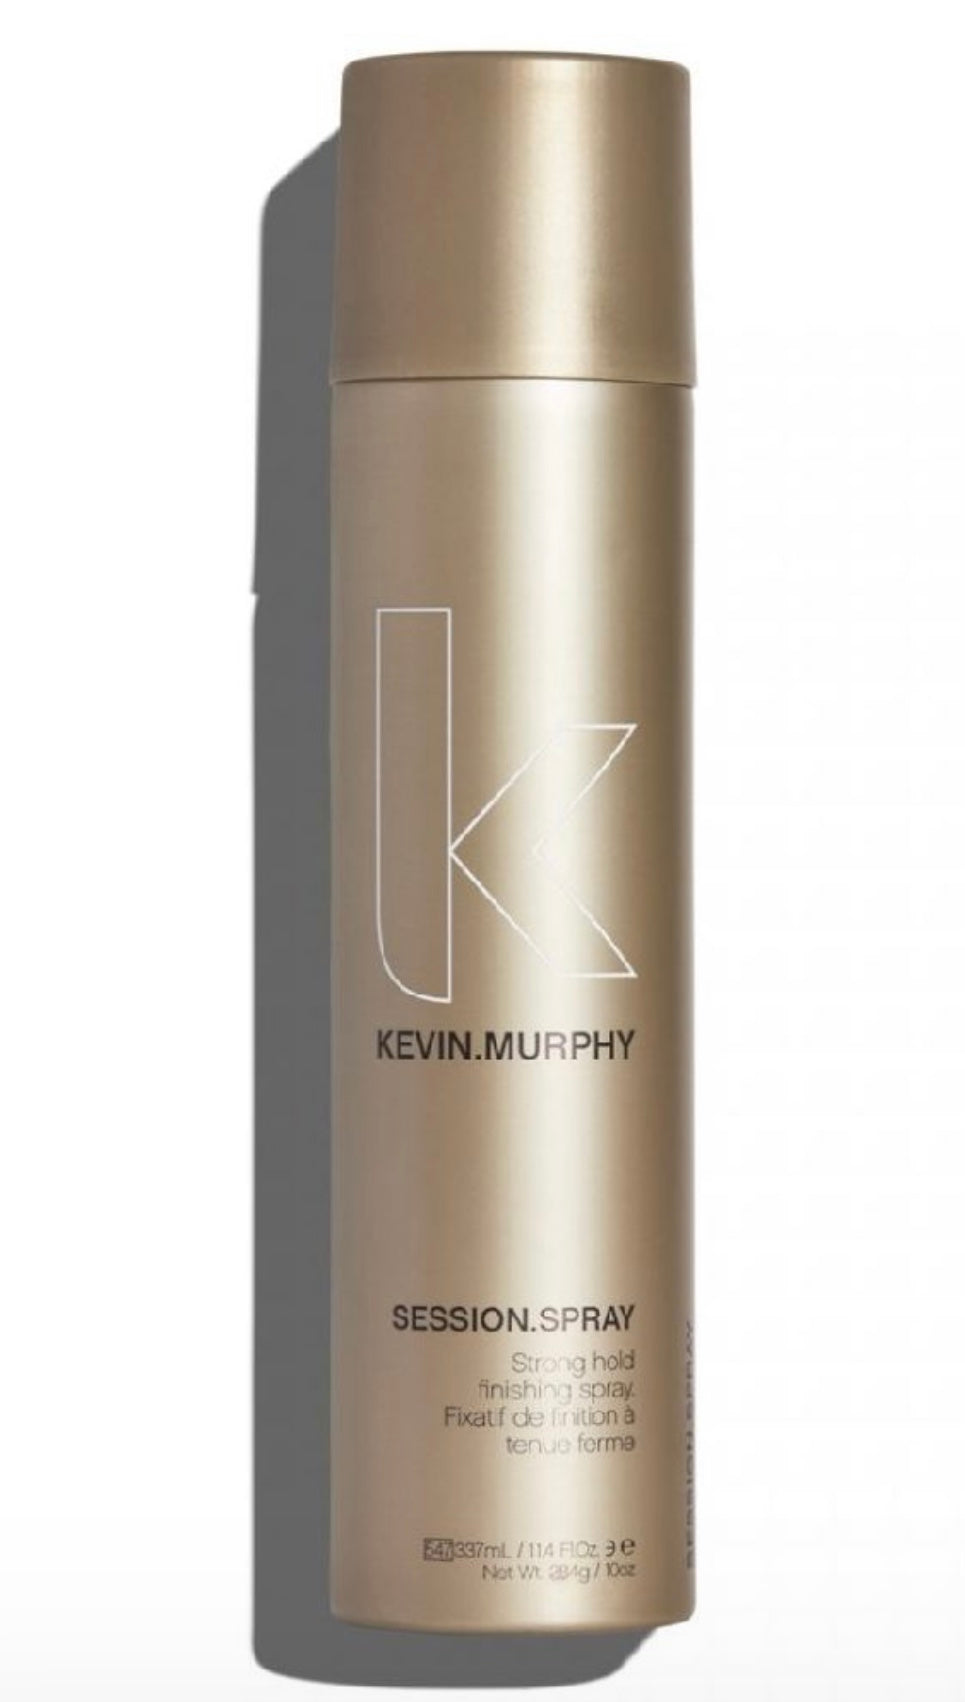 Kevin.Murphy - Session.Spray strong hold  11.4 fl. oz. / 337 ml